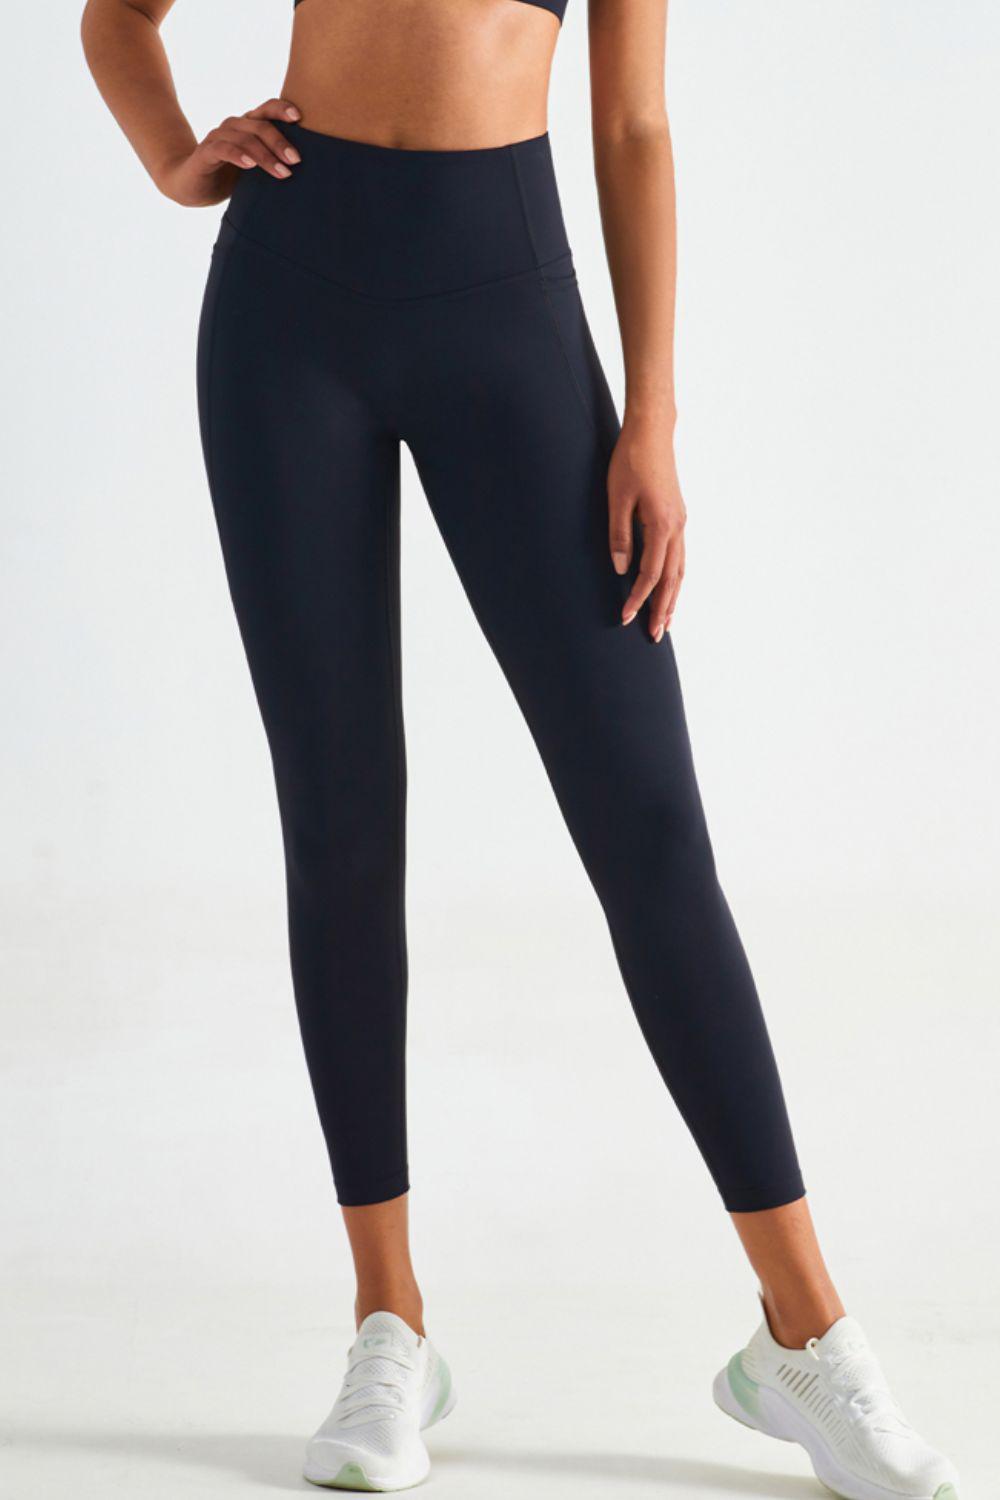 Wide Waistband Sports Leggings with Pockets-BOTTOM SIZES SMALL MEDIUM LARGE-[Adult]-[Female]-Black-4-2022 Online Blue Zone Planet